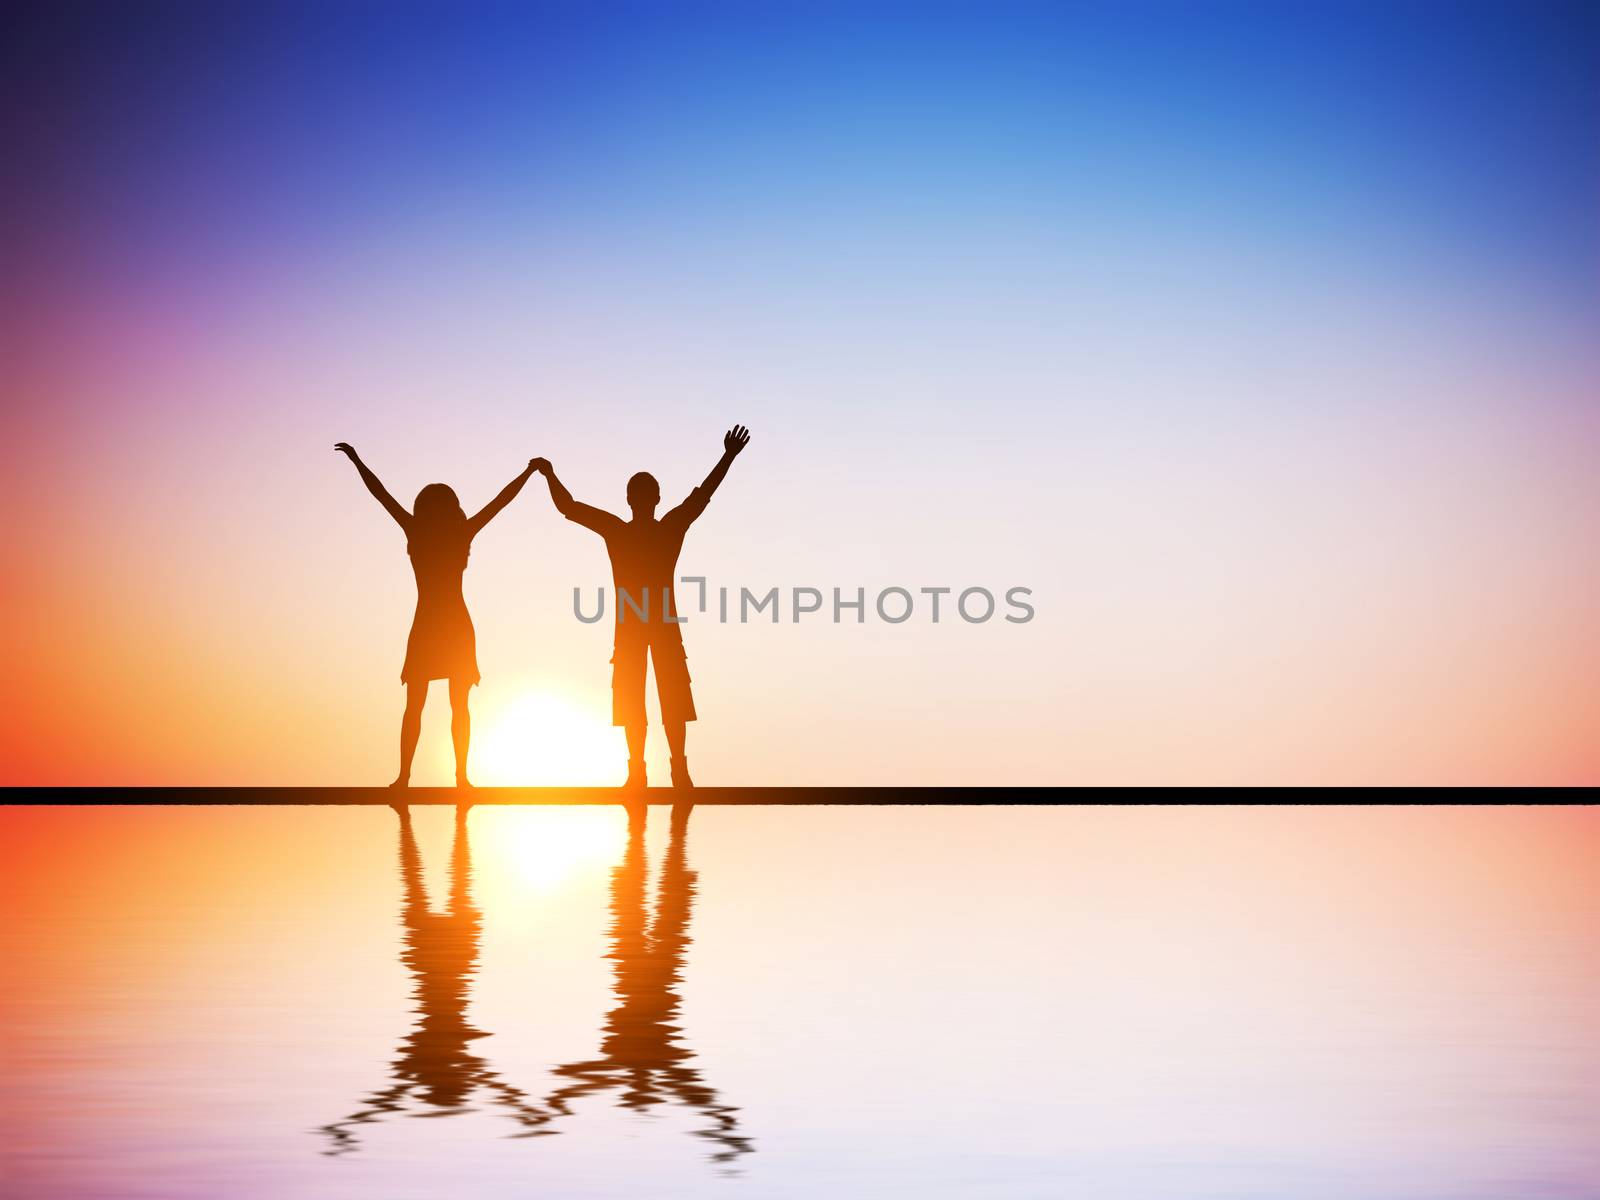 A happy couple in love standing together with hands raised at sunset by photocreo